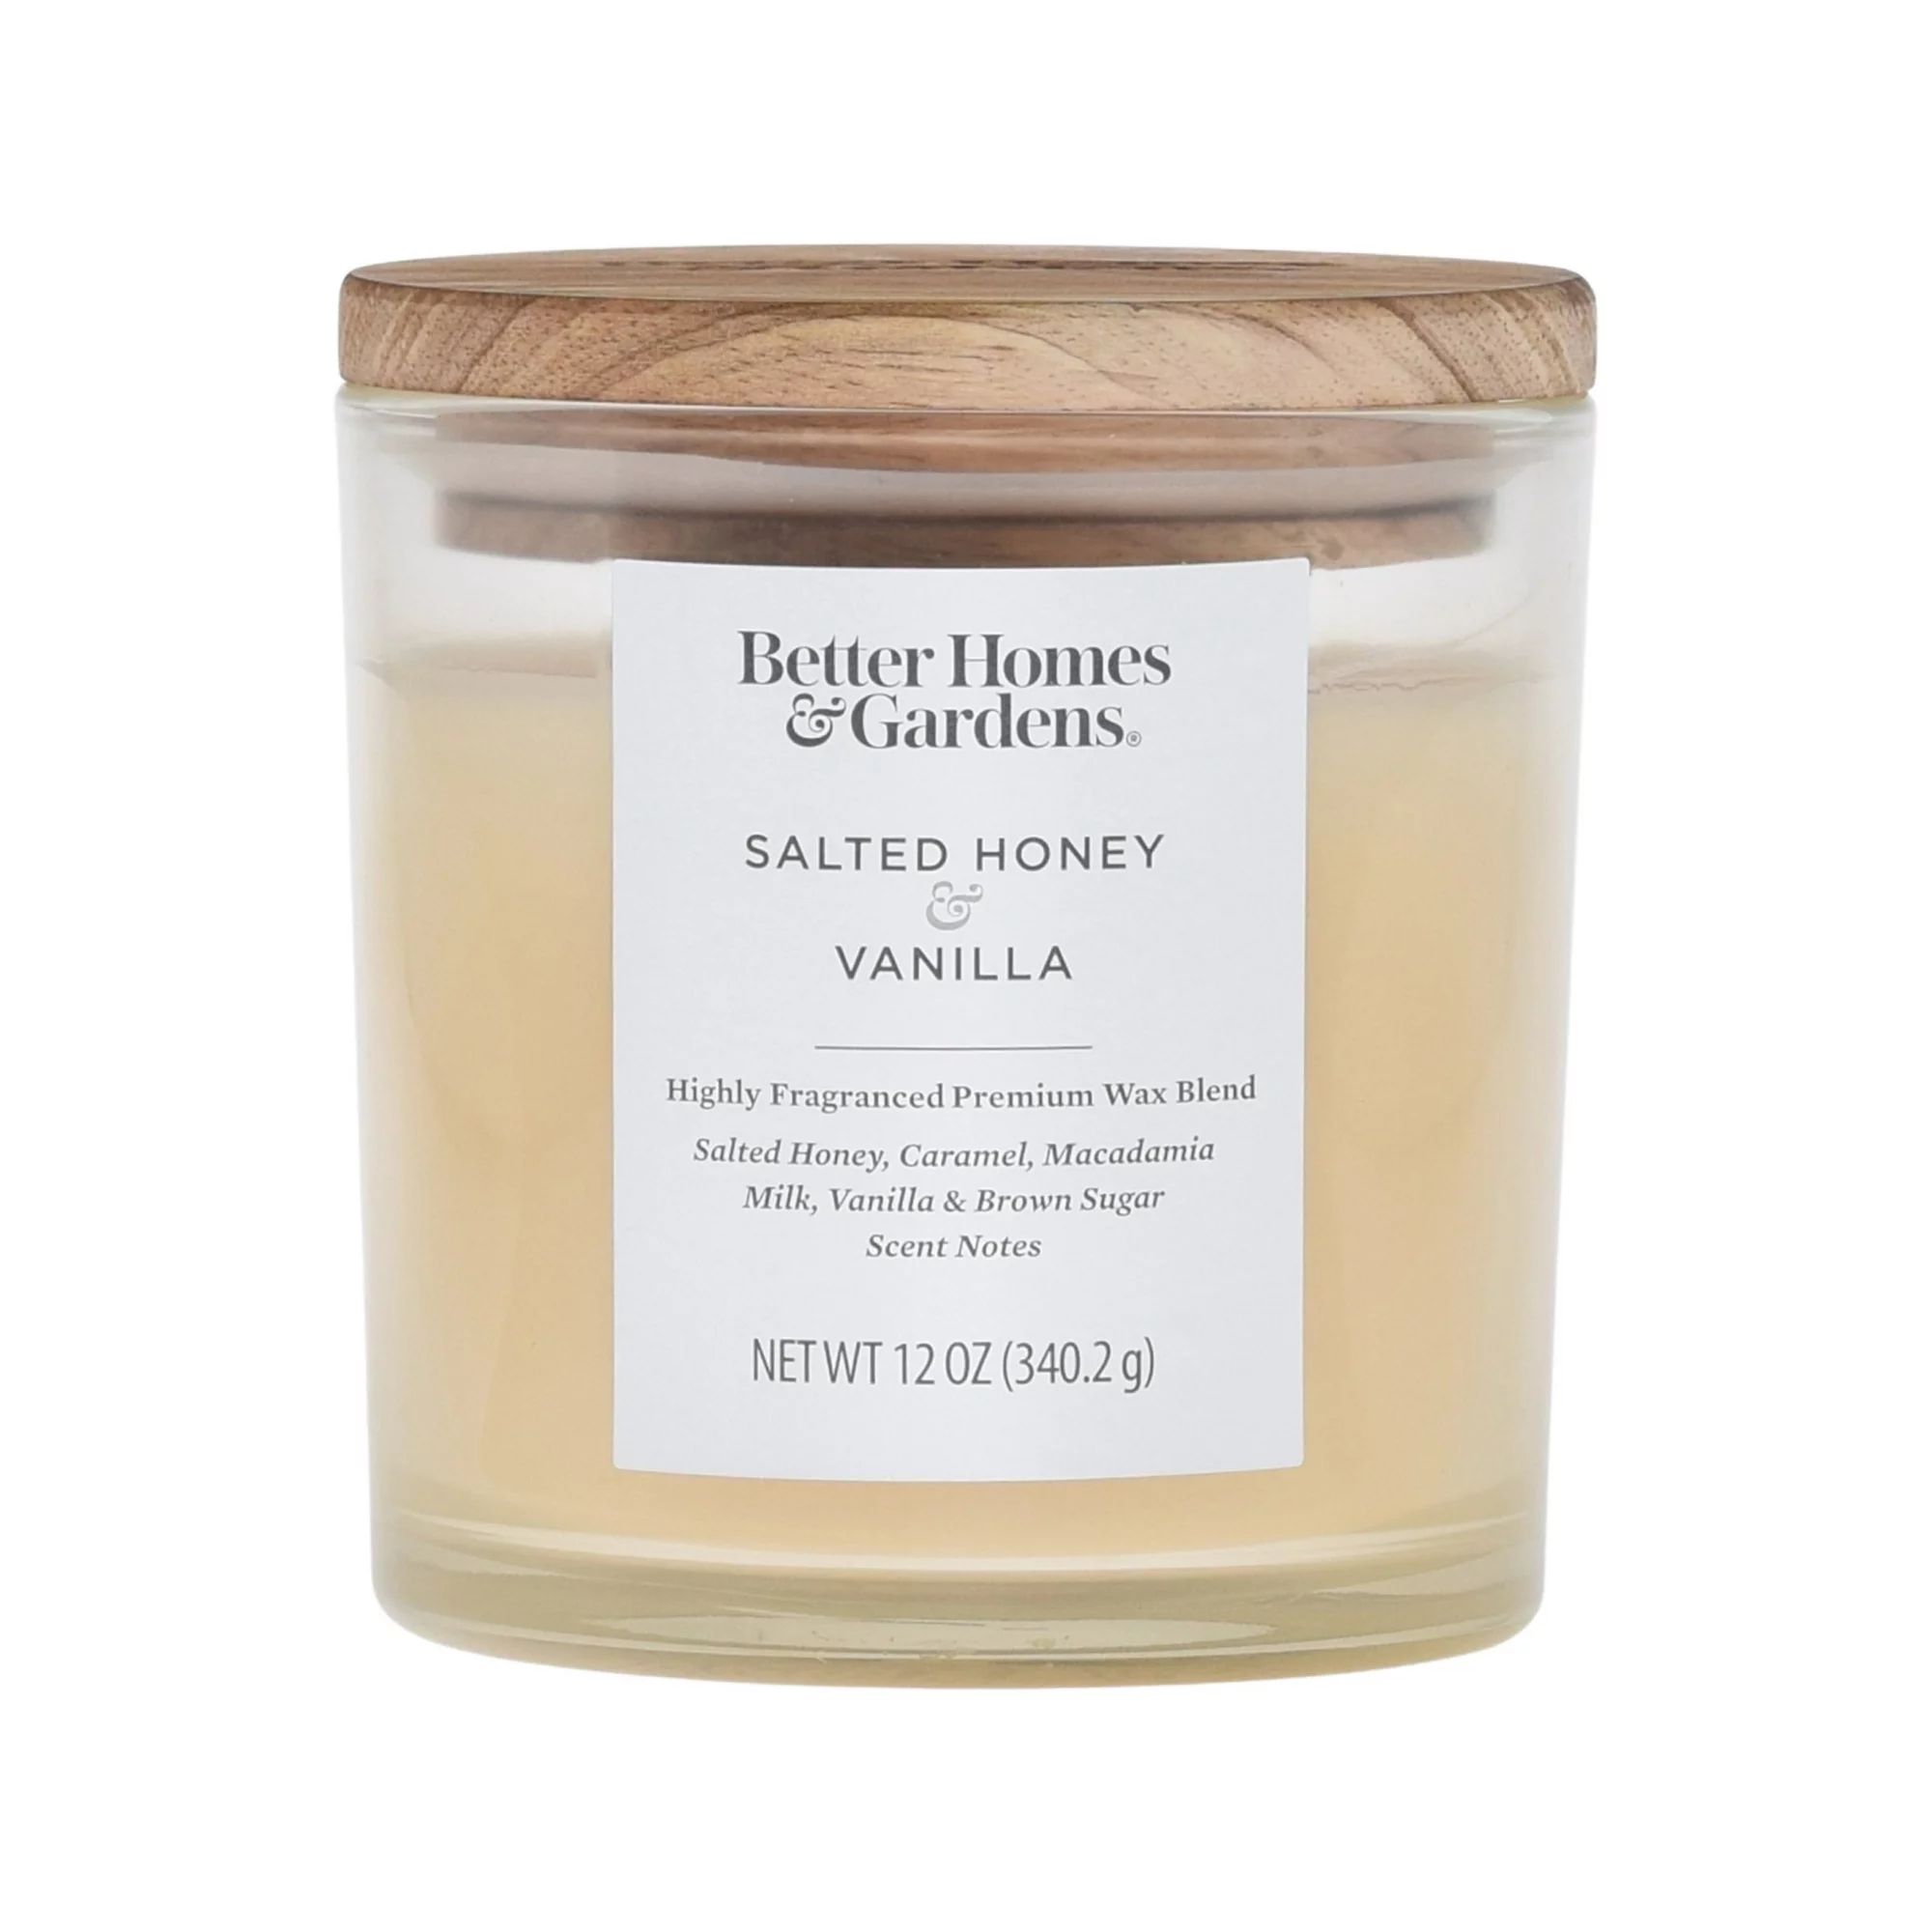 Better Homes & Gardens 12oz Salted Honey & Vanilla Scented 2-Wick Ombre Jar Candle | Walmart (US)